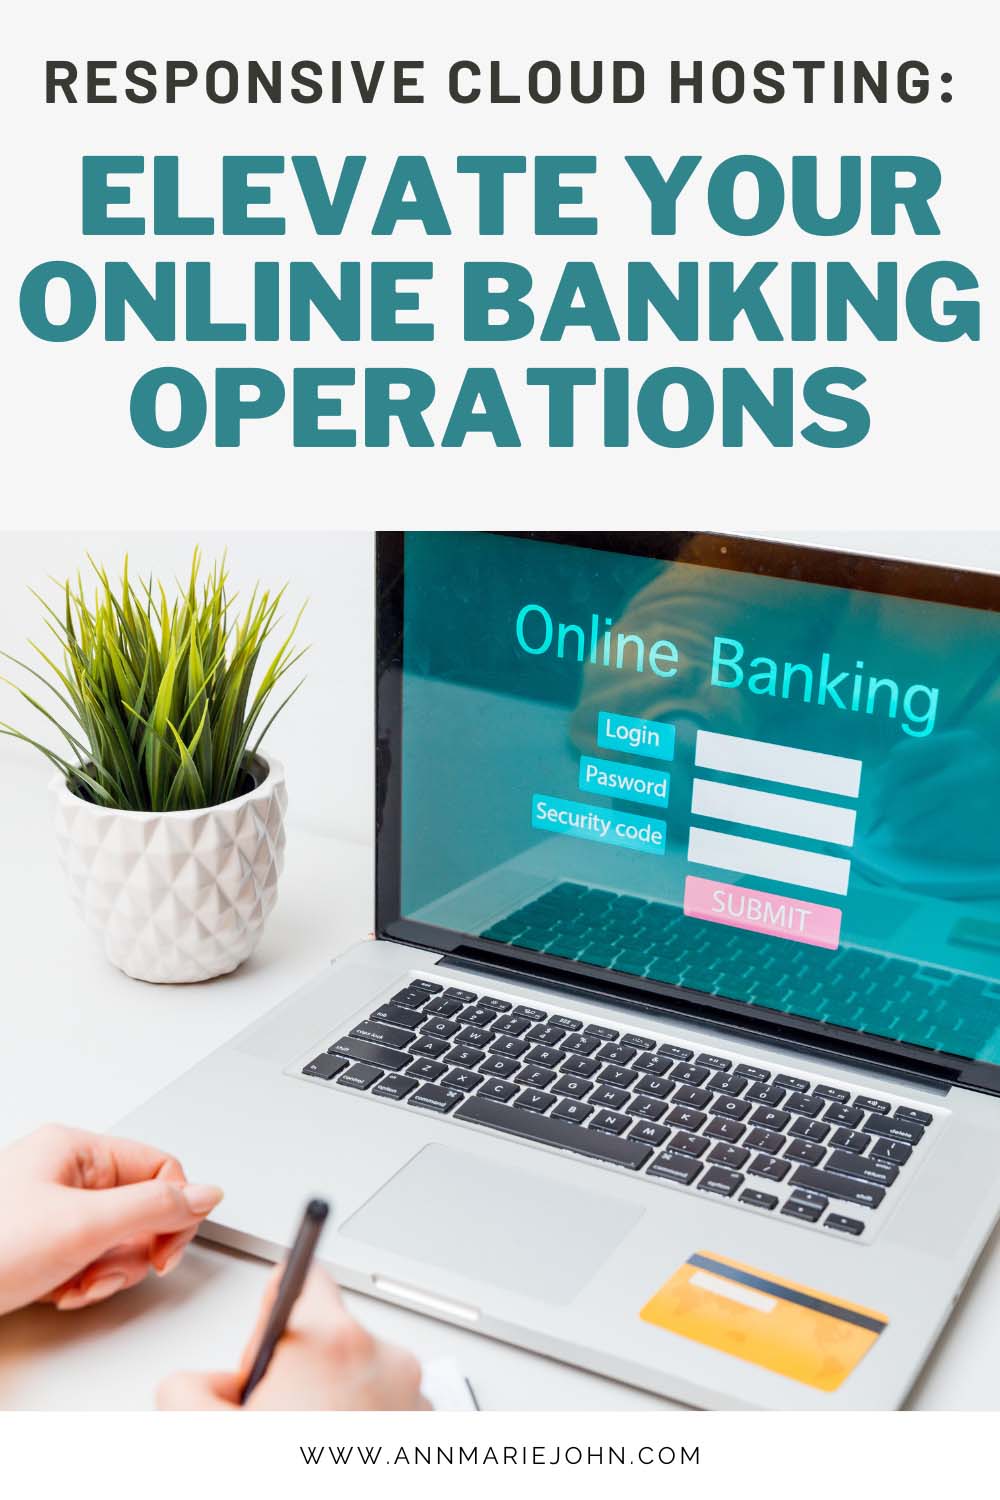 Responsive Cloud Hosting: Elevate Your Online Banking Operations